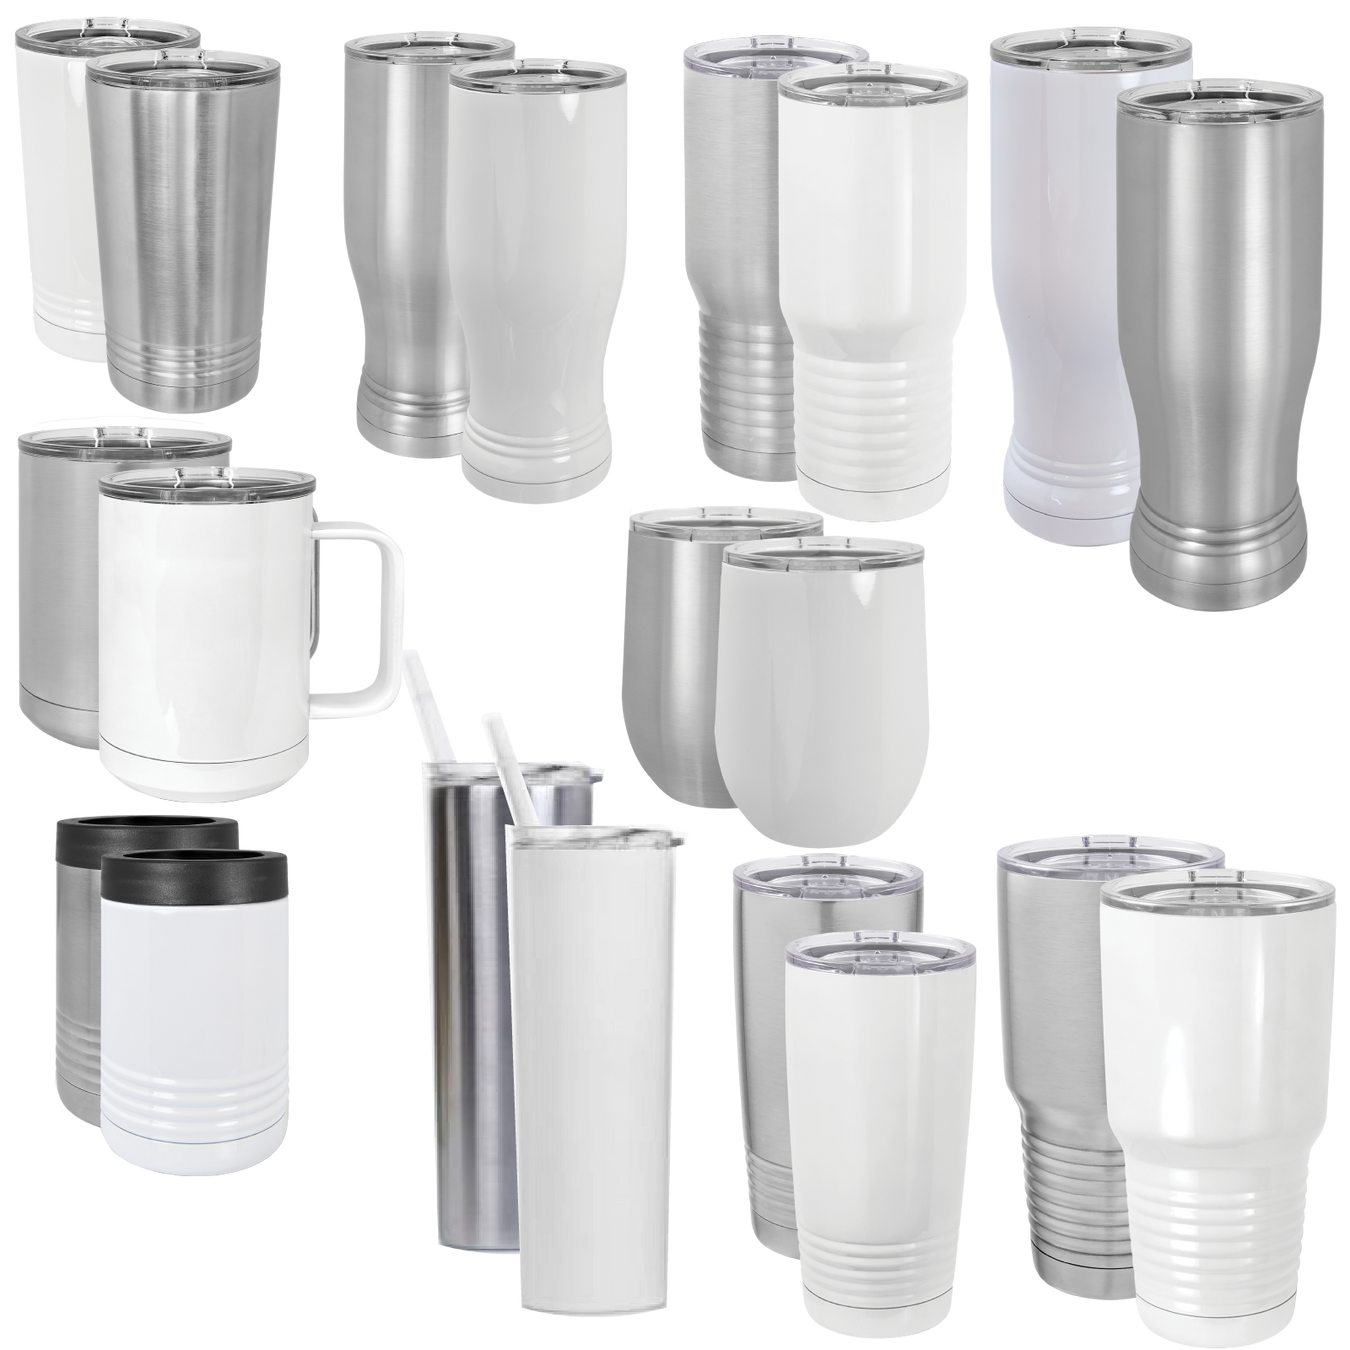 Did you know we also offer bulk ordering by doing wholesale tumblers